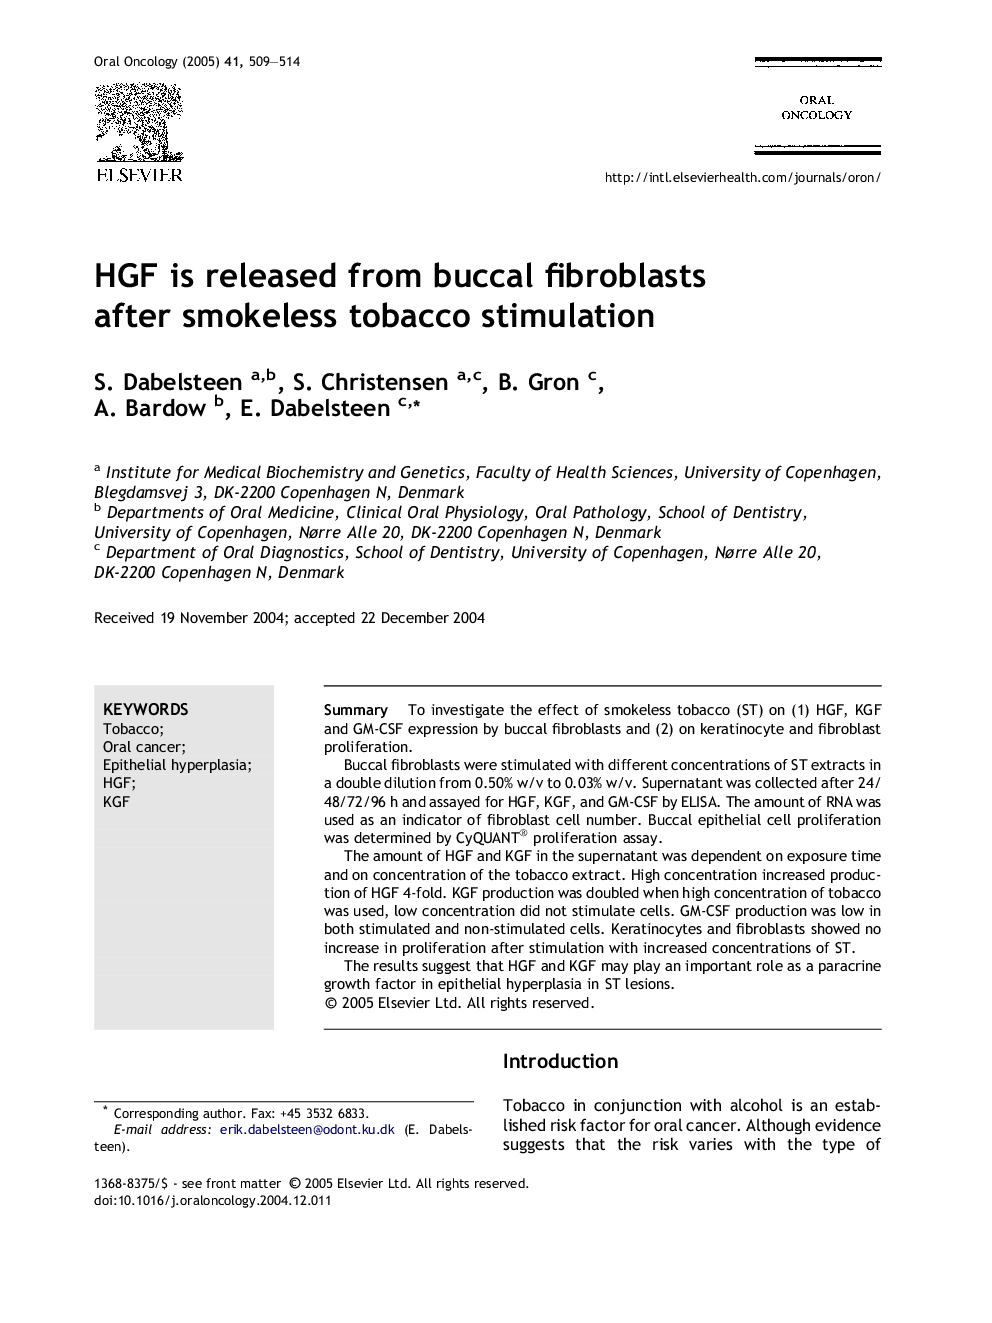 HGF is released from buccal fibroblasts after smokeless tobacco stimulation